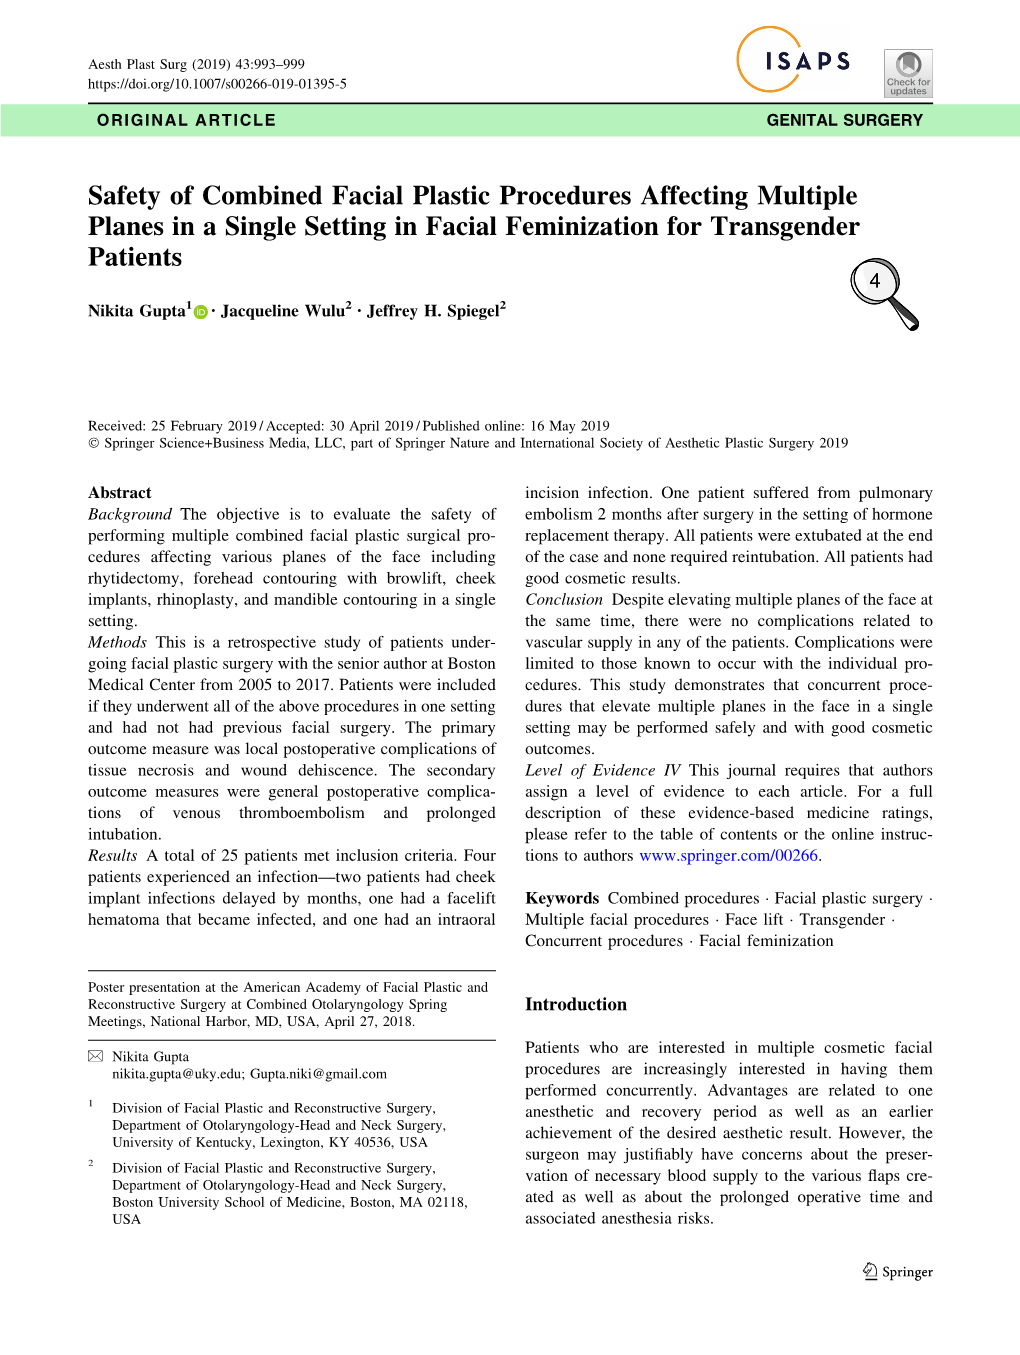 Safety of Combined Facial Plastic Procedures Affecting Multiple Planes in a Single Setting in Facial Feminization for Transgender Patients